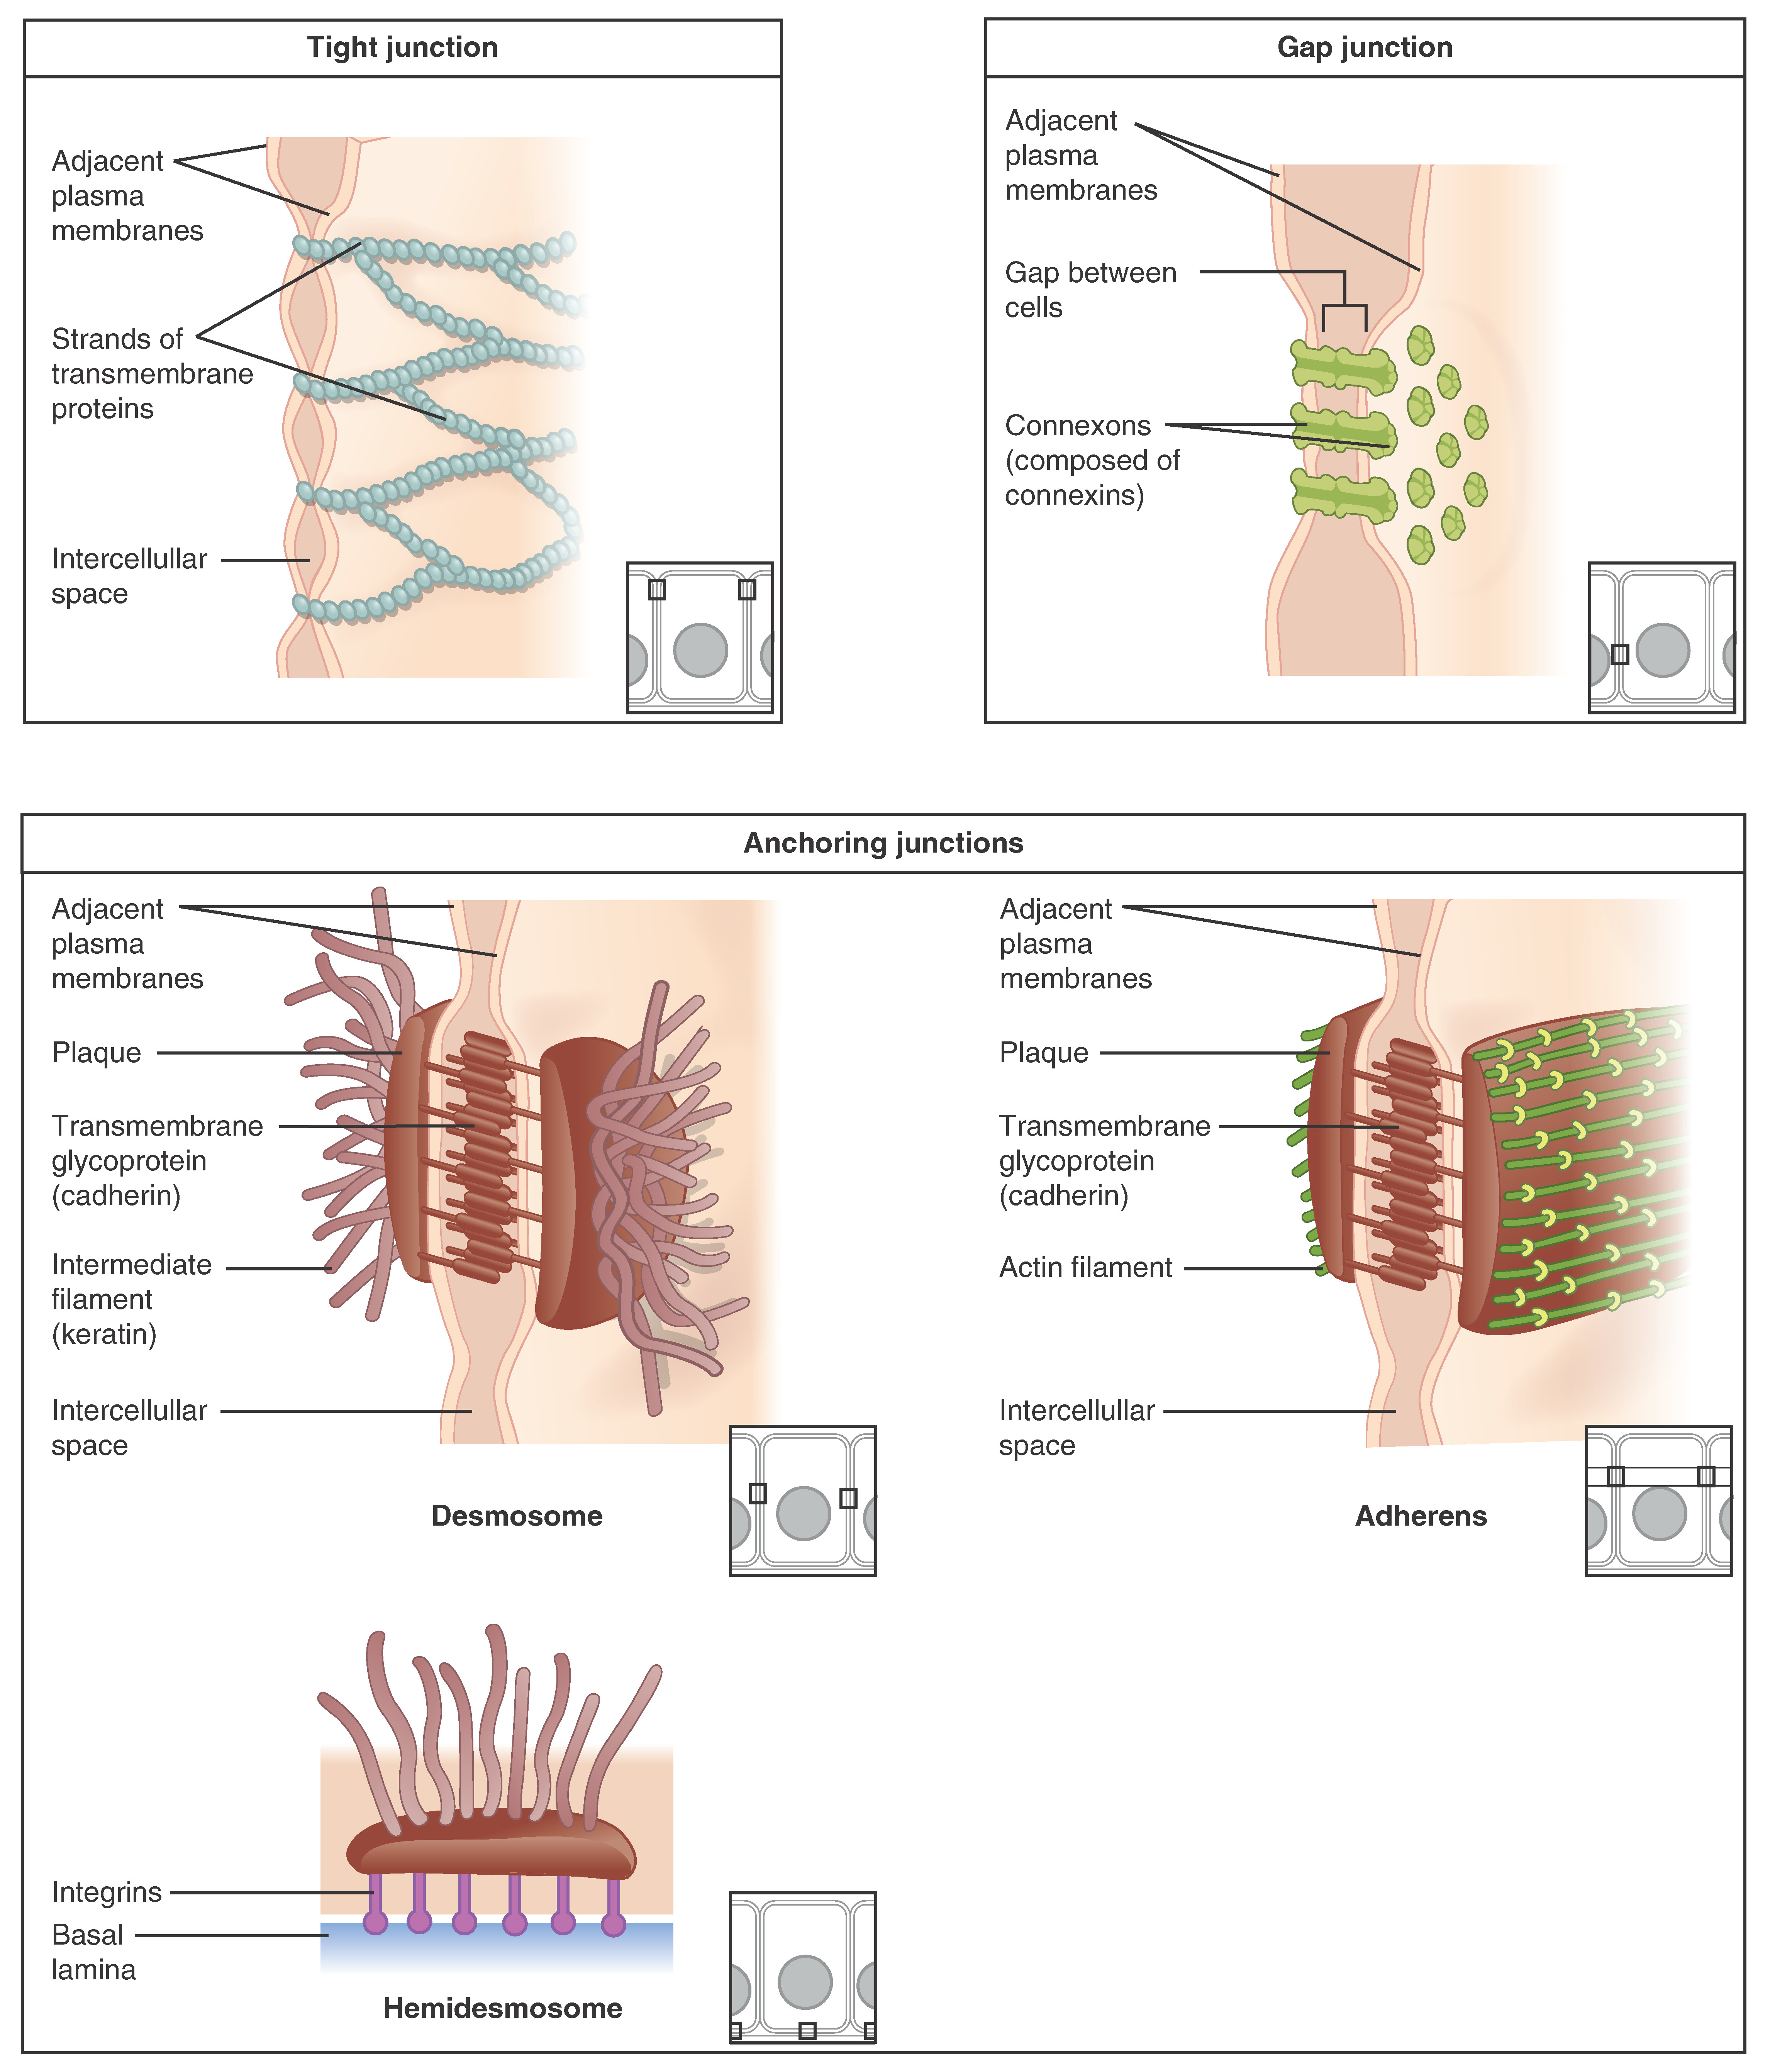 These three illustrations each show the edges of two vertical cell membranes. The cell membranes are viewed partially from the side so that the inside edge of the right cell membrane is visible. The upper left image shows a tight junction. The two cell membranes are bound by transmembrane protein strands. The proteins travel the inside edge of the right cell membrane and cross over to the left cell membrane, cinching the two membranes together. The cell membranes are still somewhat separated in between neighboring strands, creating intercellular spaces. The upper right diagram shows a gap junction. The gap junctions are composed of two interlocking connexins, which are round, hollow tubes that extend through the cell membranes. Two connexins, one from the left cell membrane and the other from the right cell membrane, meet between the two cells, forming a connexon. Even at the site of the connexon, there is a small gap between the cell membranes. On the inside edge of the right cell membrane, the gap junction appears as a depression. Three connexins are embedded into the membranes like buttons on a shirt. The bottom images show the three types of anchoring junctions. The left image shows a desmosome. Here, the inside edge of both the right and left cell membranes have brown, round plaques. Each plaque has tentacle-like intermediate filaments (keratin) that extend into each cell’s cytoplasm. The two plaques are connected across the intercellular space by several interlocking transmembrane glycoproteins (cadherin). The connected glycoproteins look similar to a zipped-up zipper between the right and left cell membranes. The right image shows an adheren. These are similar to desmosomes, with two plaques on the inside edge of each cell membrane connected across the intercellular space by glycoproteins. However, the plaques do not contain the tentacle-like intermediate filaments branching into the cytoplasm. Instead, the plaques are ribbed with green actin filaments. The filaments are neatly arranged in parallel, horizontal strands on the surface of the plaque facing the cytoplasm. The bottom image shows a hemidesmosome. Rather than located between two neighboring cells, the hemidesmosome is located between the bottom of a cell and the basement membrane. A hemidesmosome contains a single plaque on the inside edge of the cell membrane. Like the desmosome, intermediate filaments project from the plaque into the cytoplasm. The opposite side of the plaque has purple, knob-shaped integrins extending out to the basal lamina of the basement membrane.